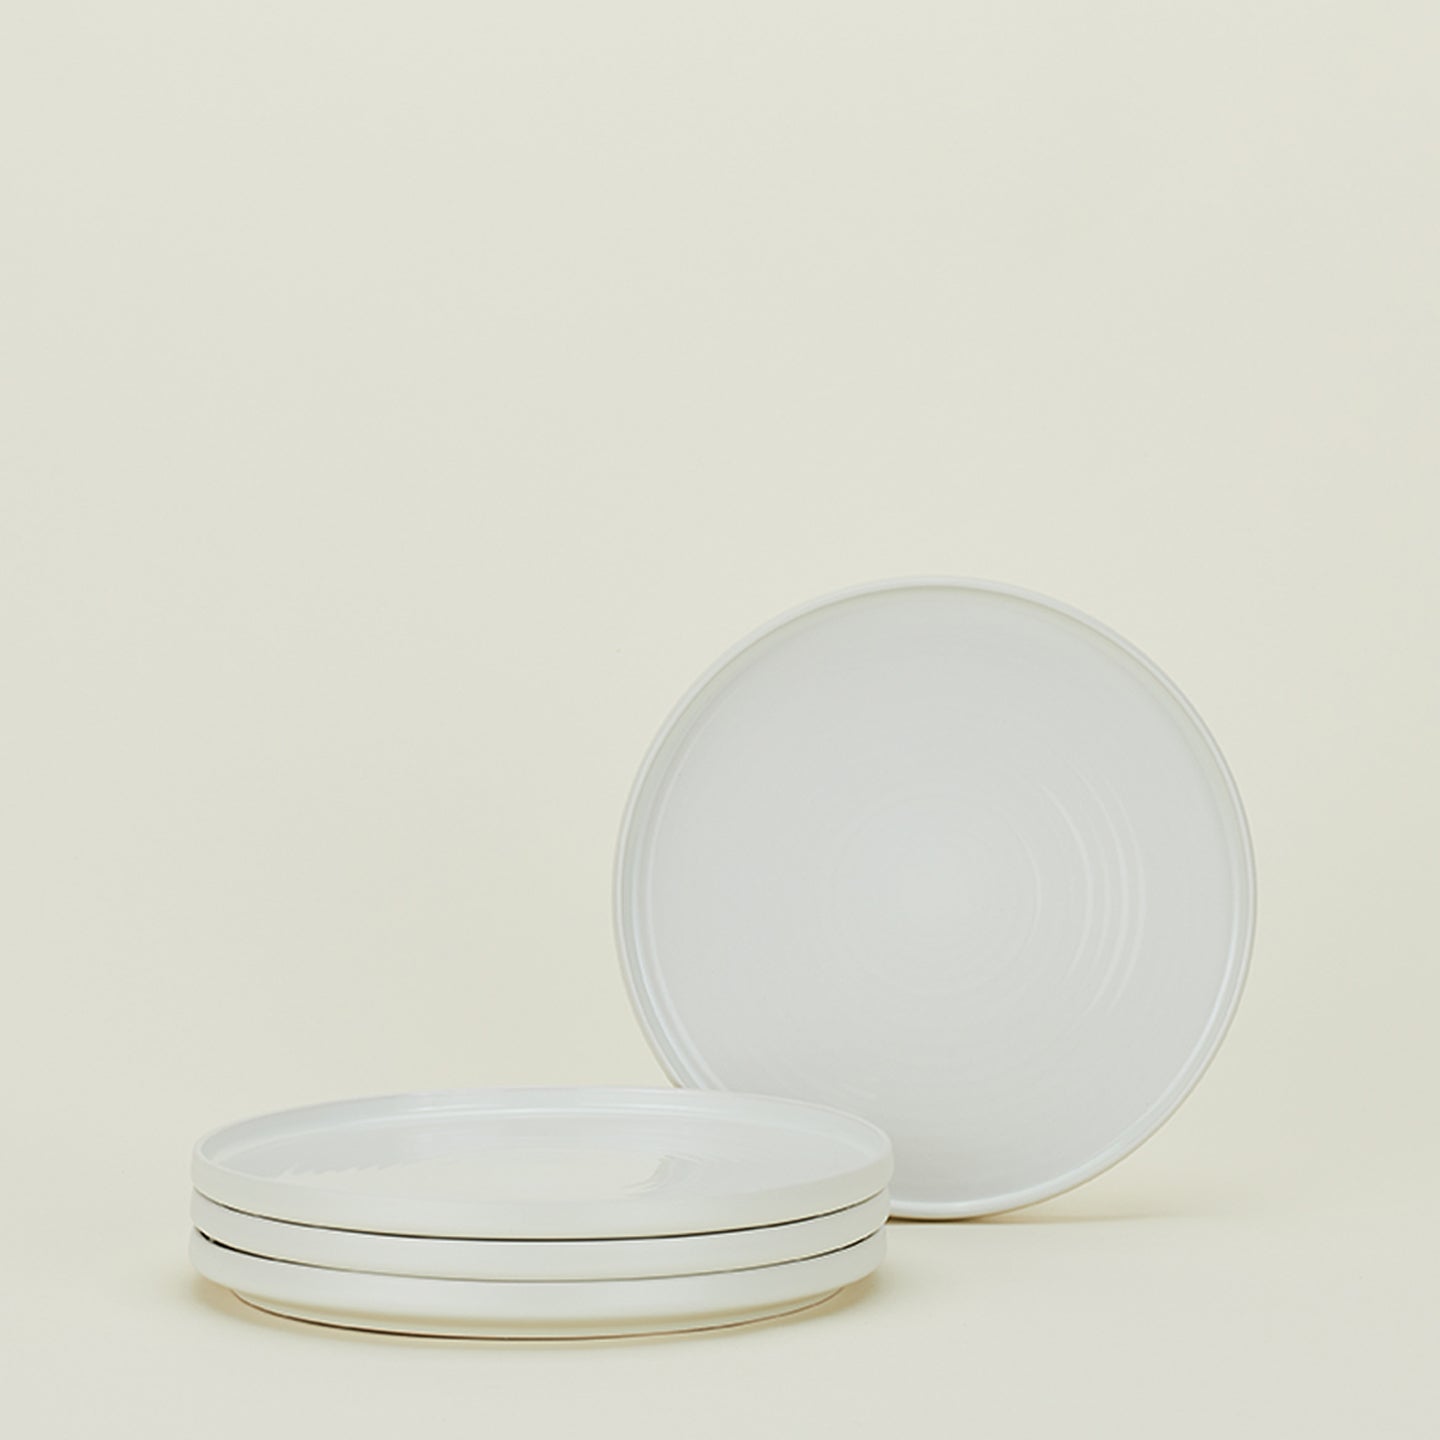 Minimalist white plates showcase simplicity and clean aesthetics.